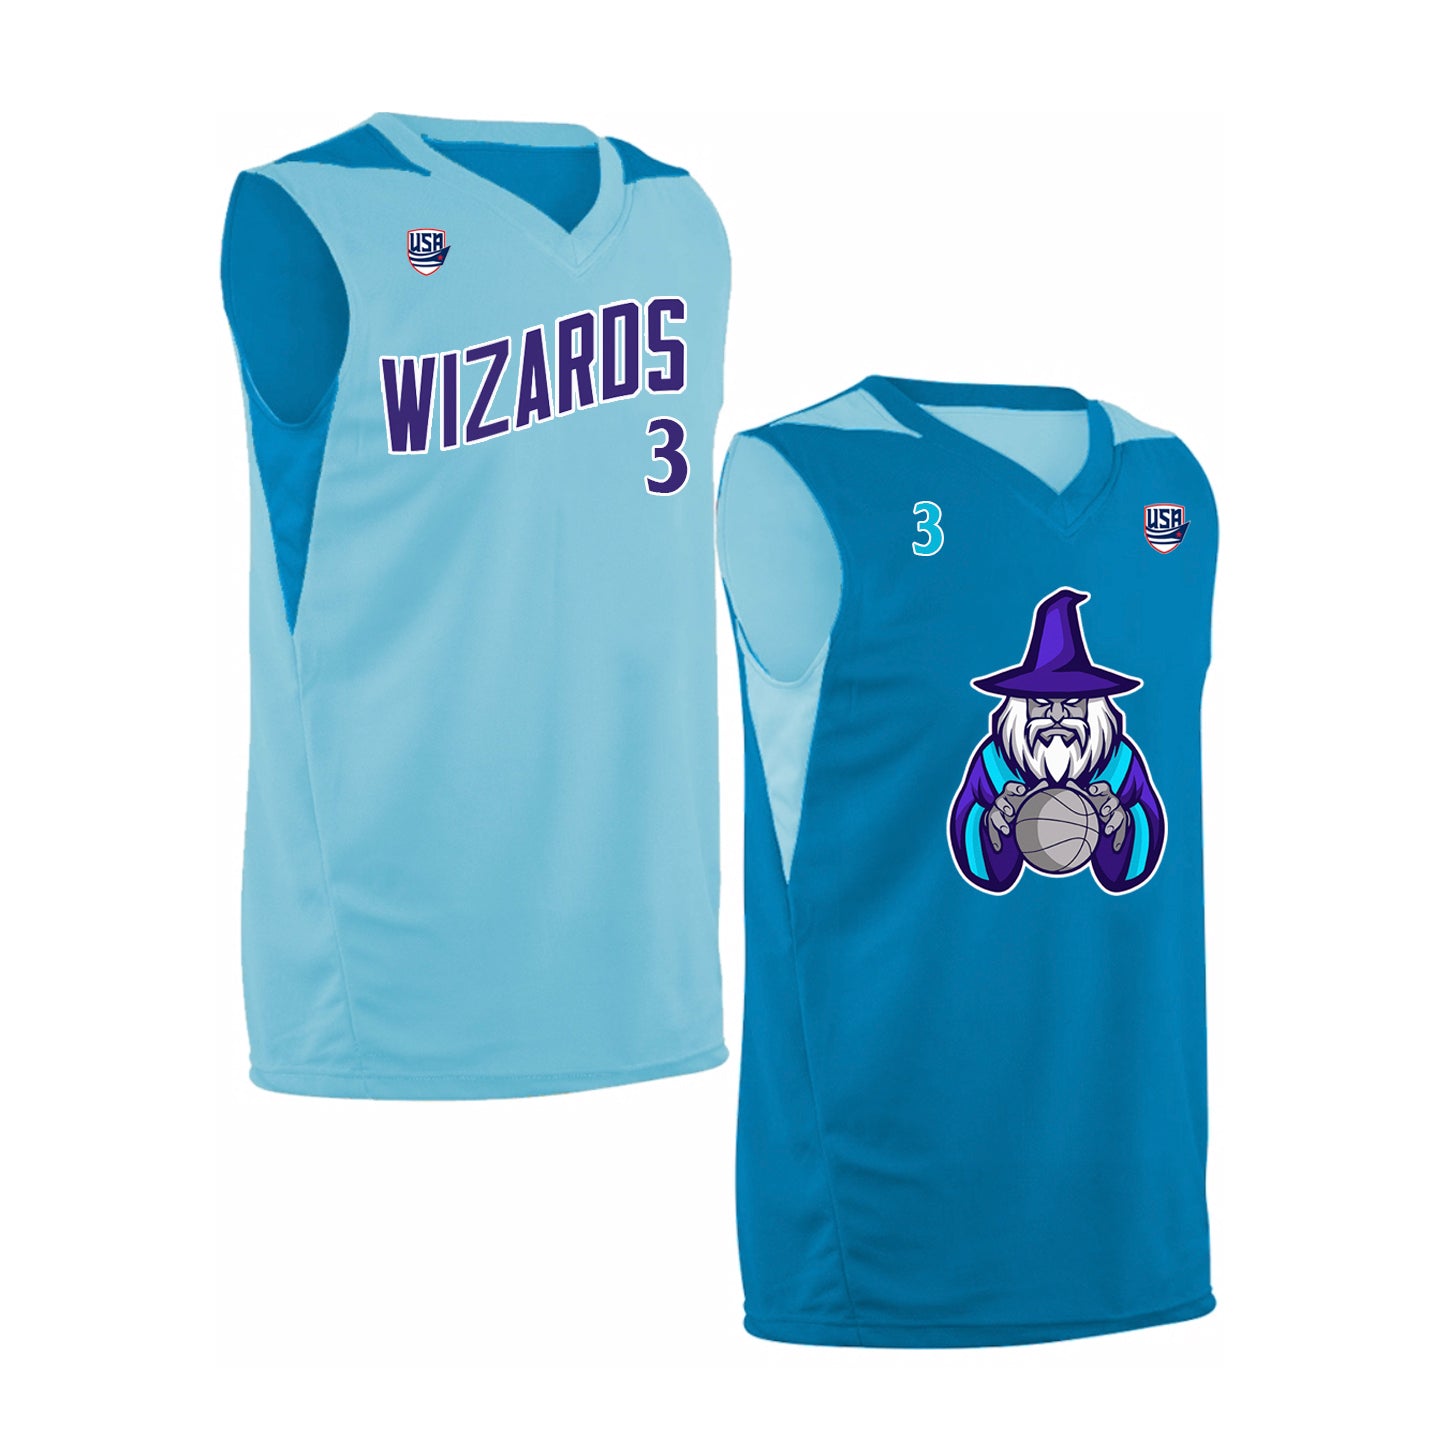 wizards throwback jersey